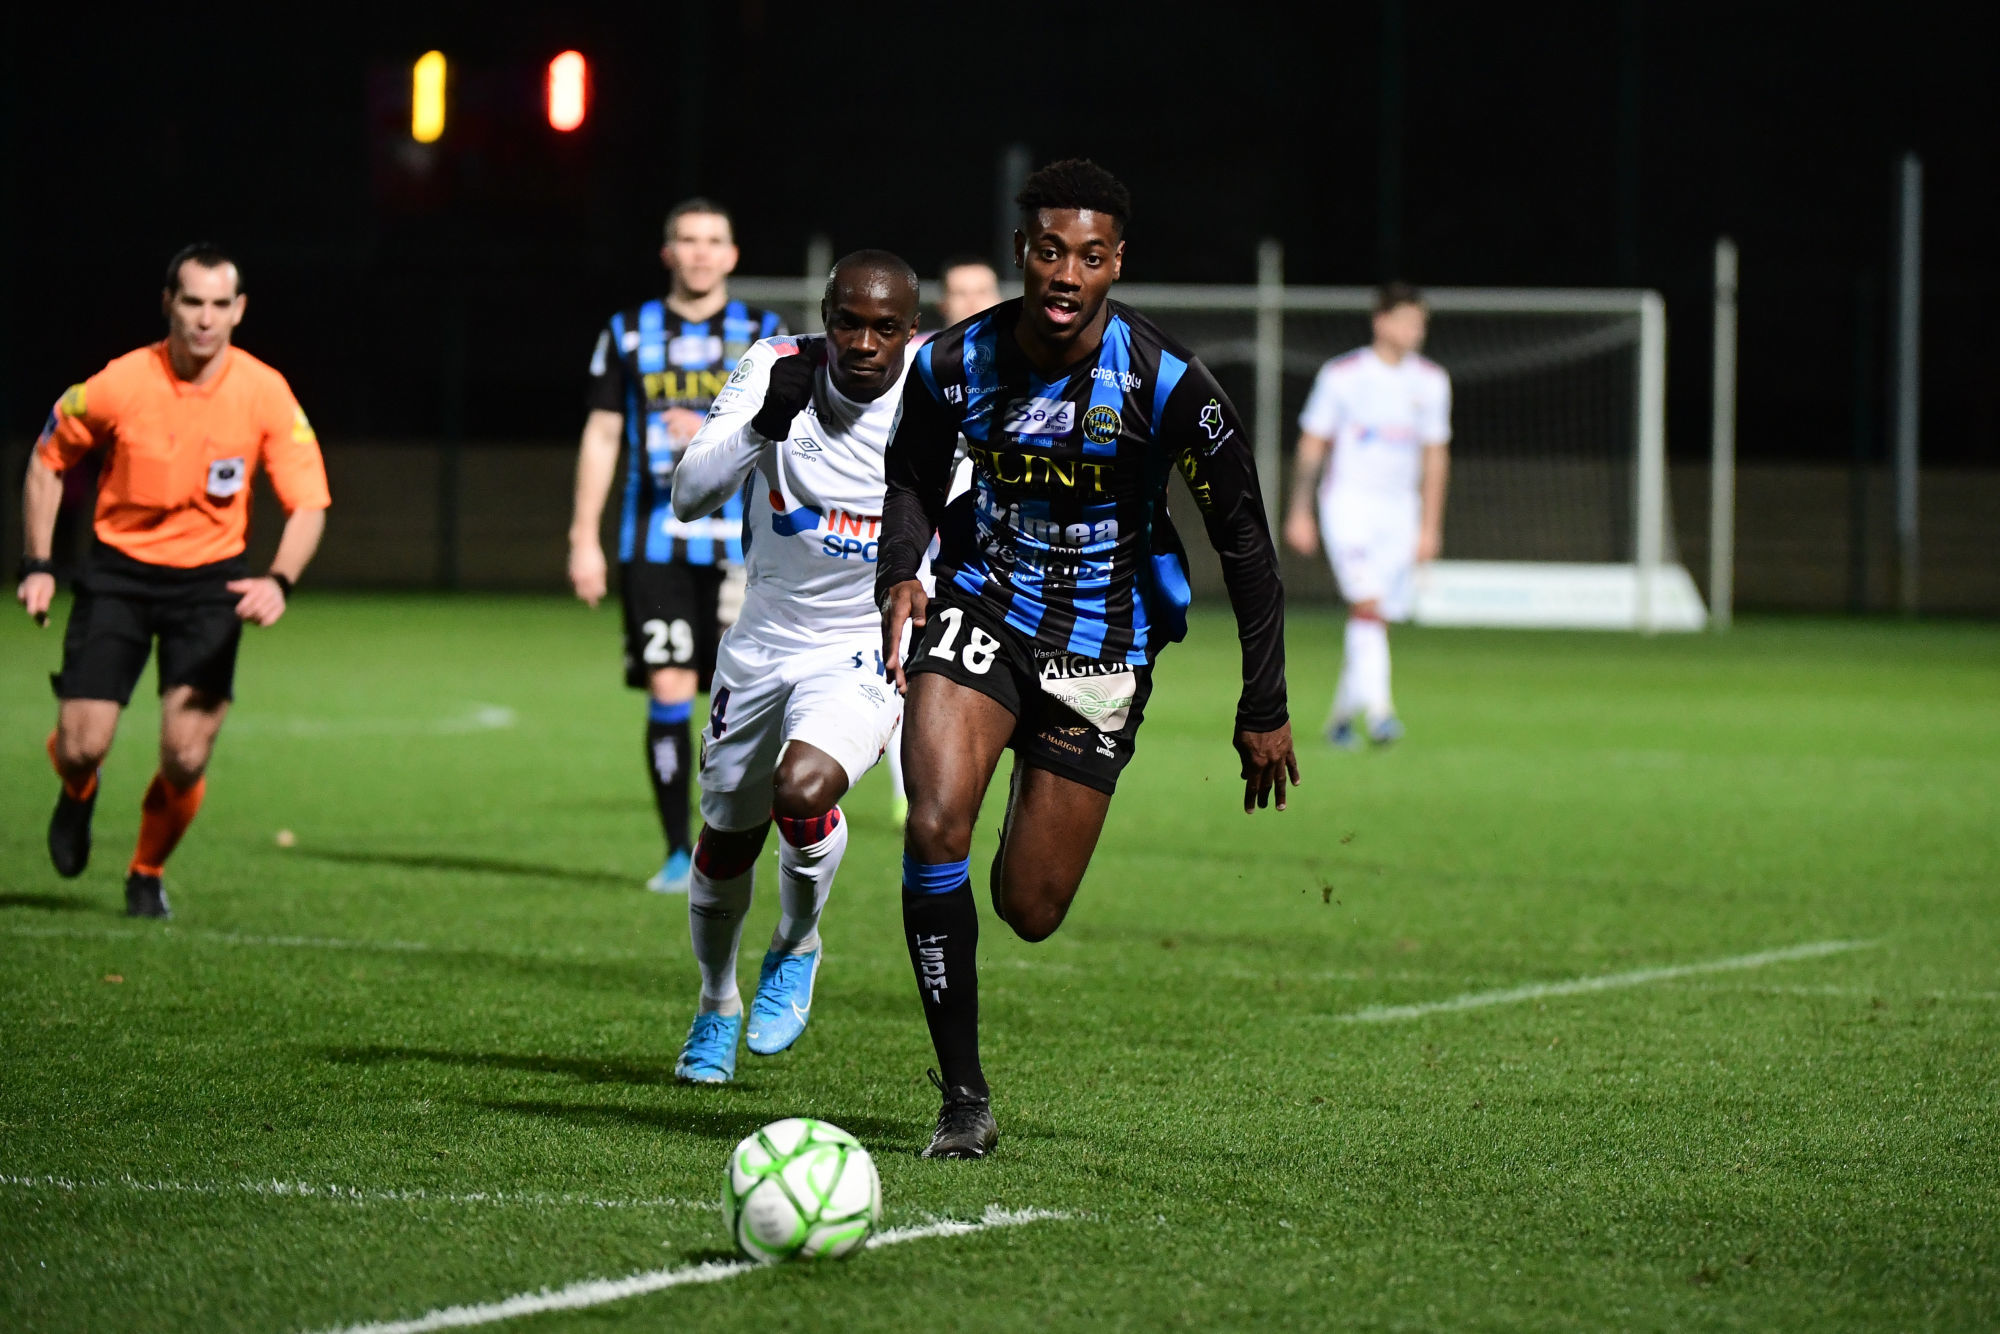 (R-L) Shaquil DELOS of Chambly and Caleb ZADY SERY of Caen during the Ligue 2 match between Chambly and Caen at Stade Pierre Brisson on January 31, 2020 in Beauvais, France. (Photo by Dave Winter/Icon Sport) - Caleb ZADY SERY - Shaquil DELOS - Stade Pierre-Brisson - Beauvais (France)